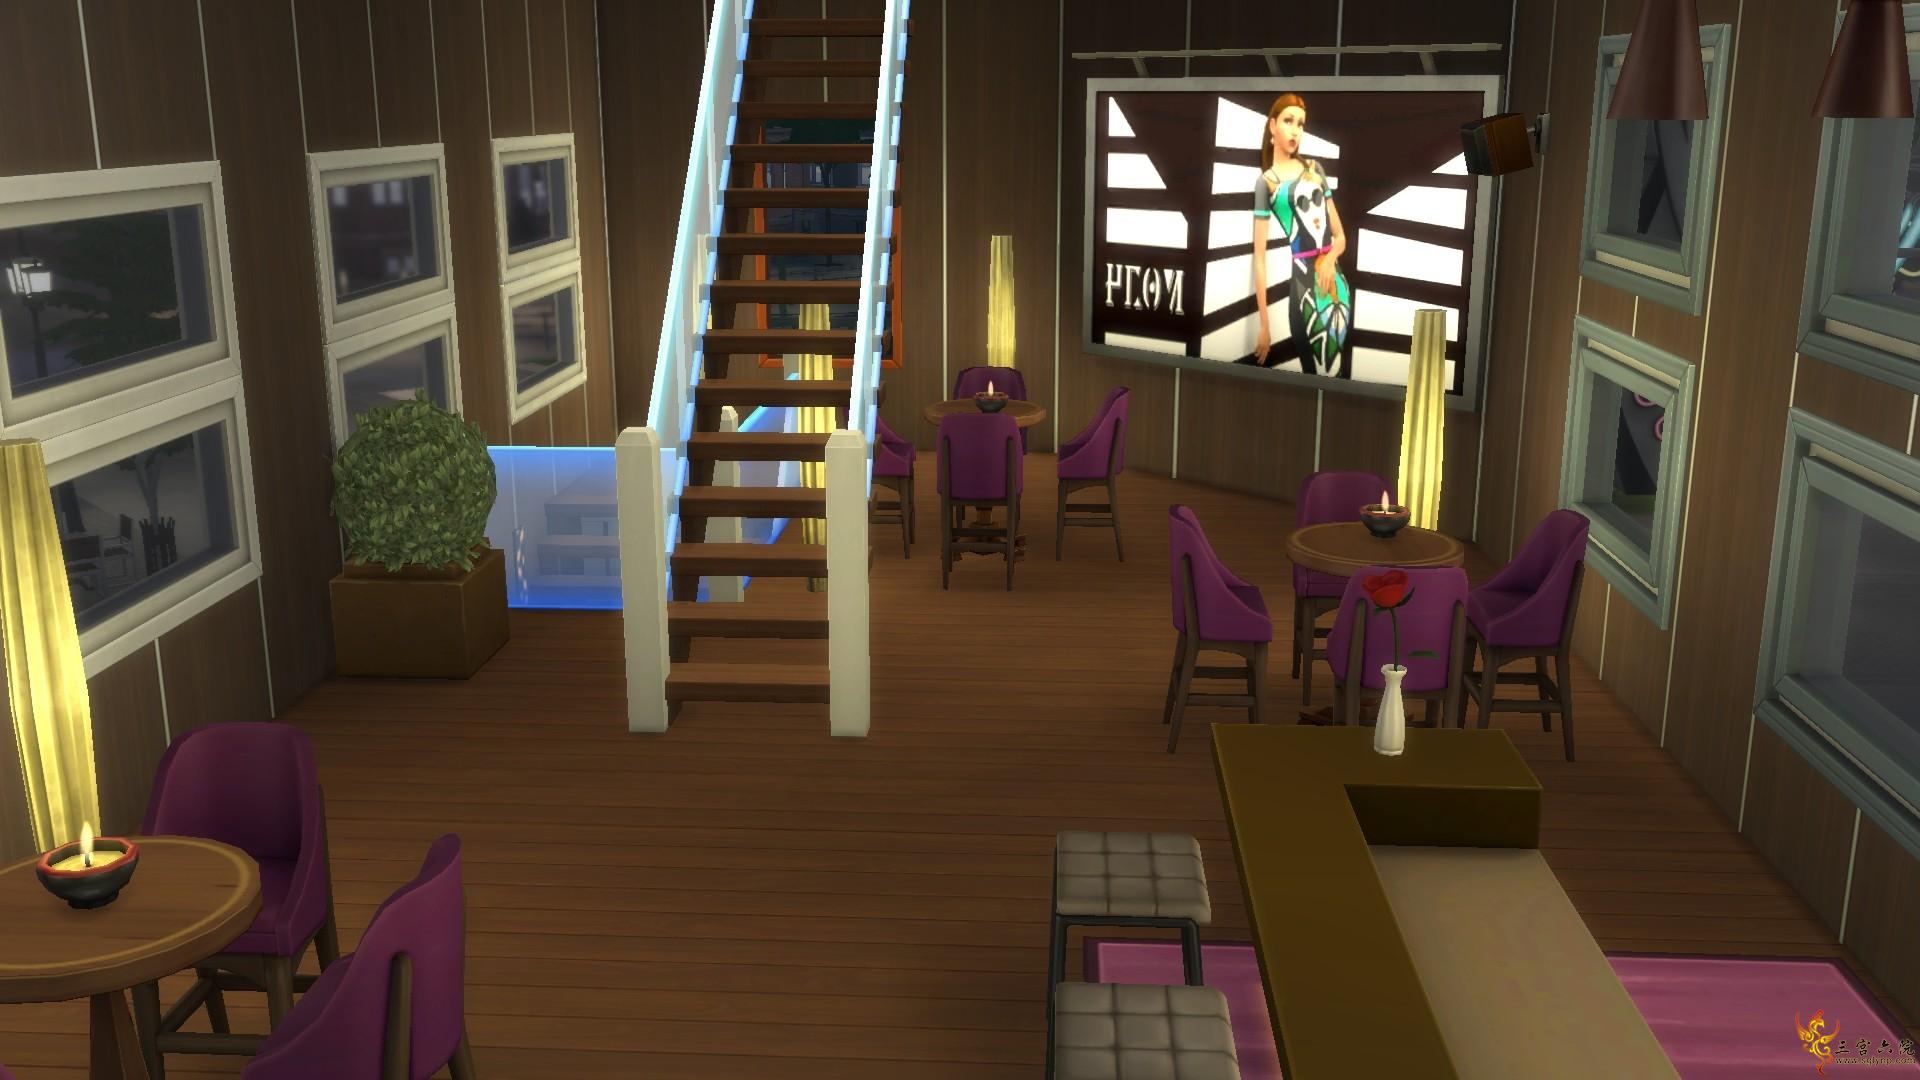 The Sims 4 2021_8_26 下午 04_37_43.png